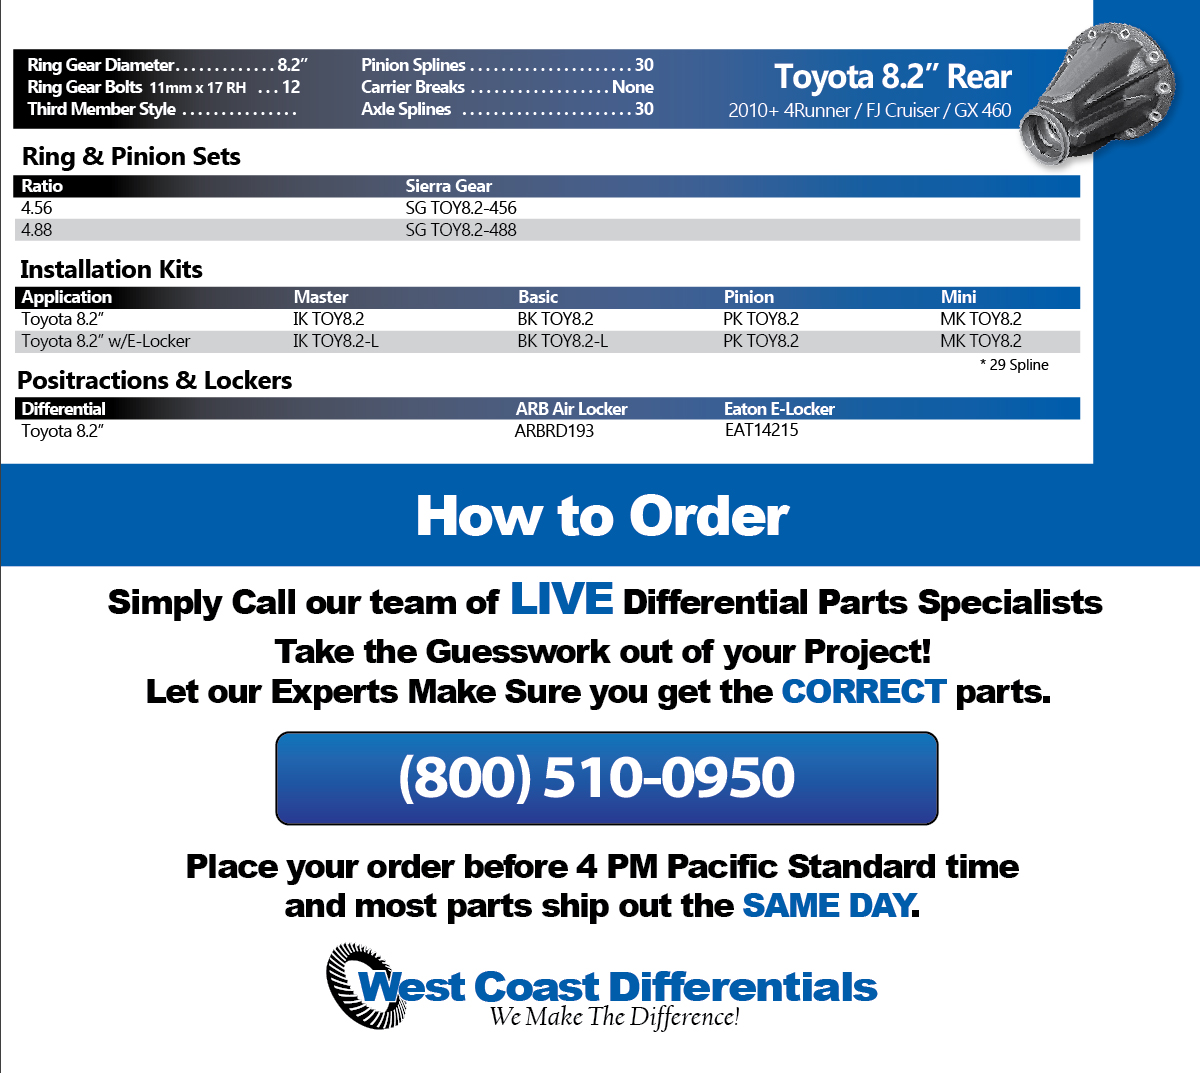 Toyota 8.2 4Runner, FJ Cruiser & GX460 Axle - Differential, Ring and Pinion, Gear & Axle Parts Catalog